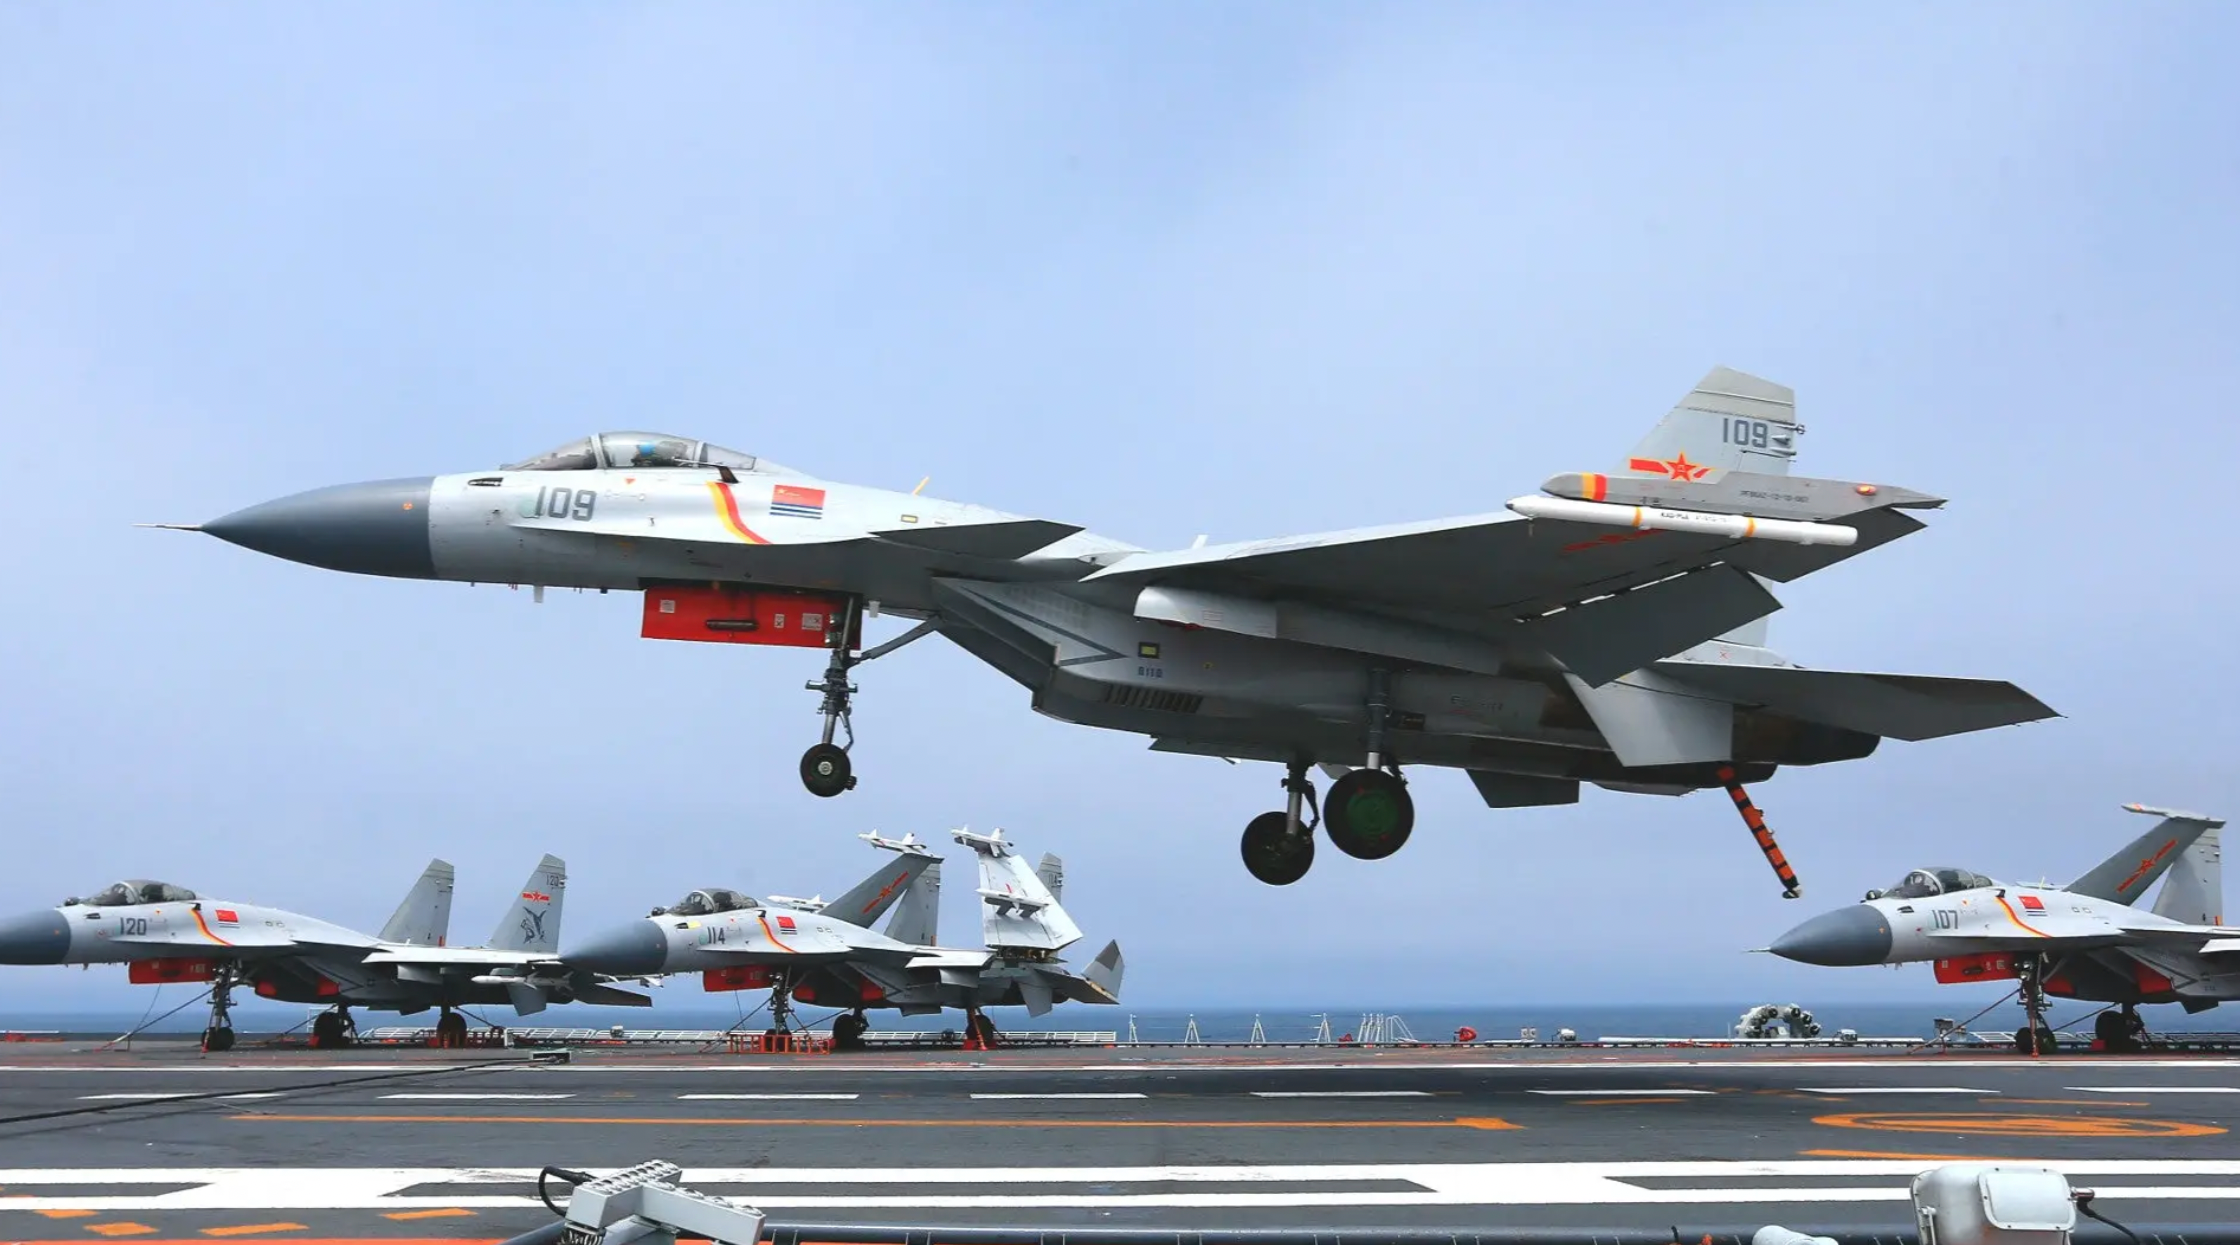 Our Best Look Yet At China’s J-15S Two-Seat Carrier-Capable Fighter